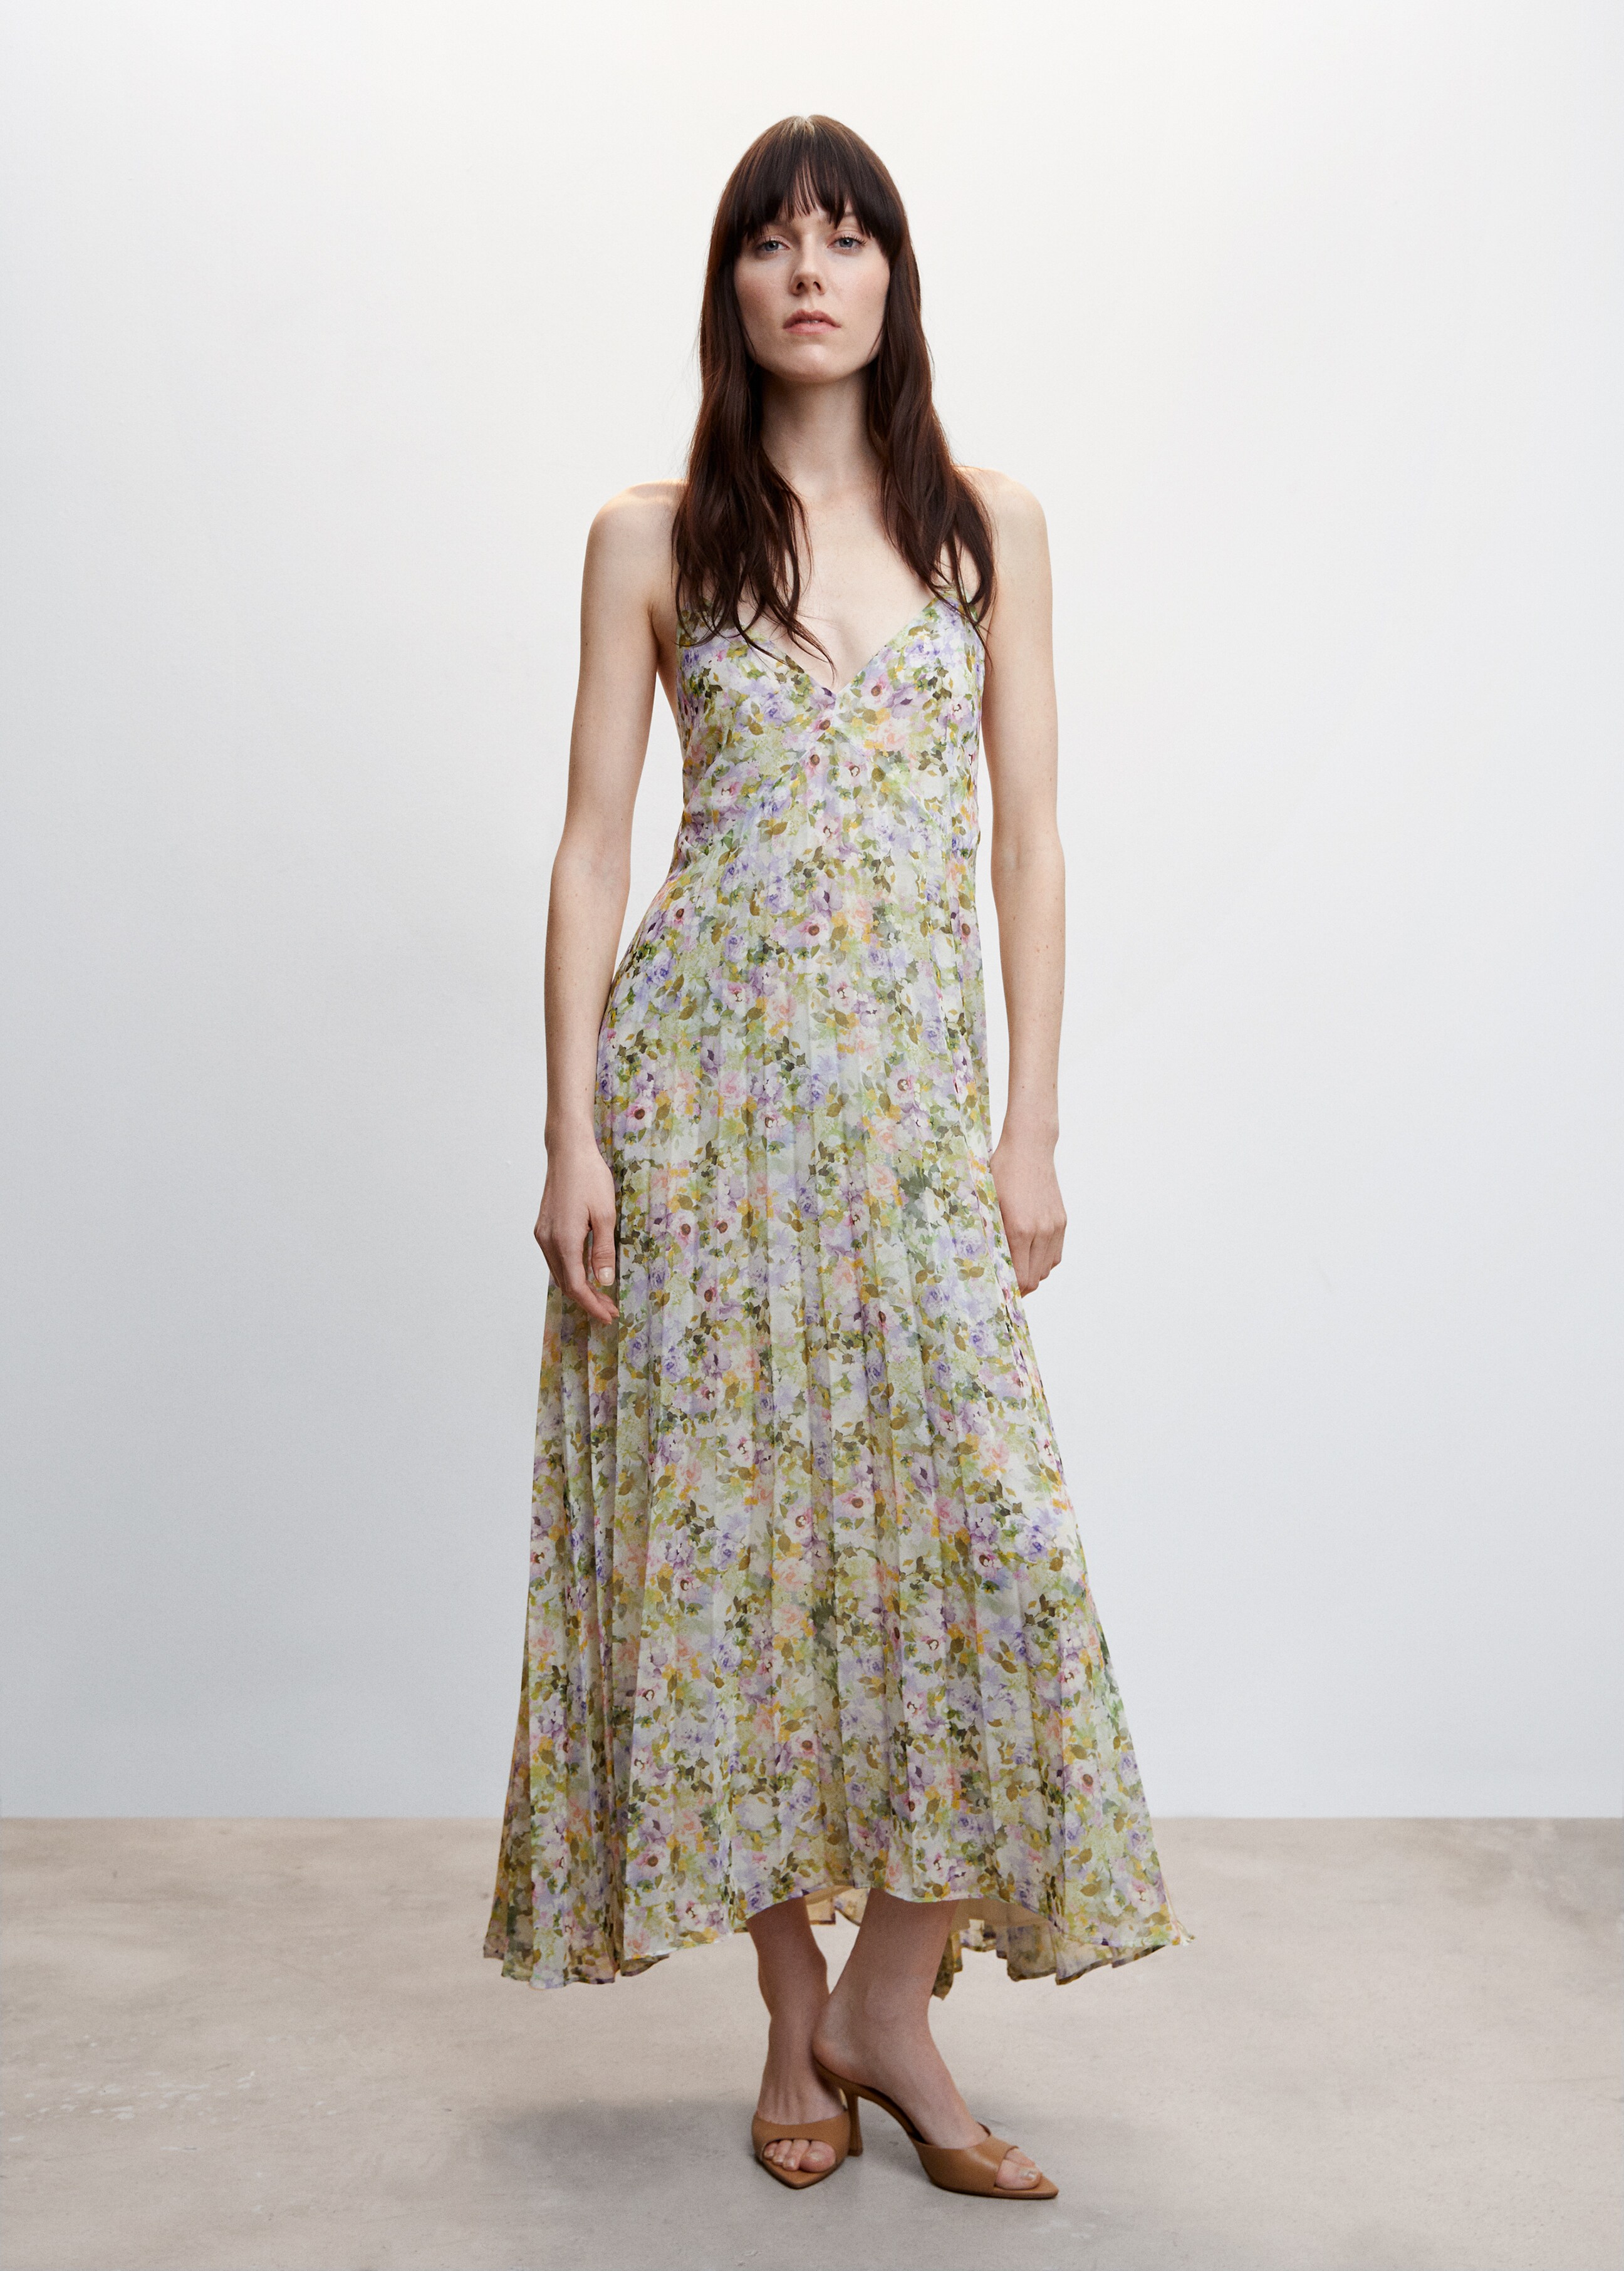 Pleated floral dress - General plane